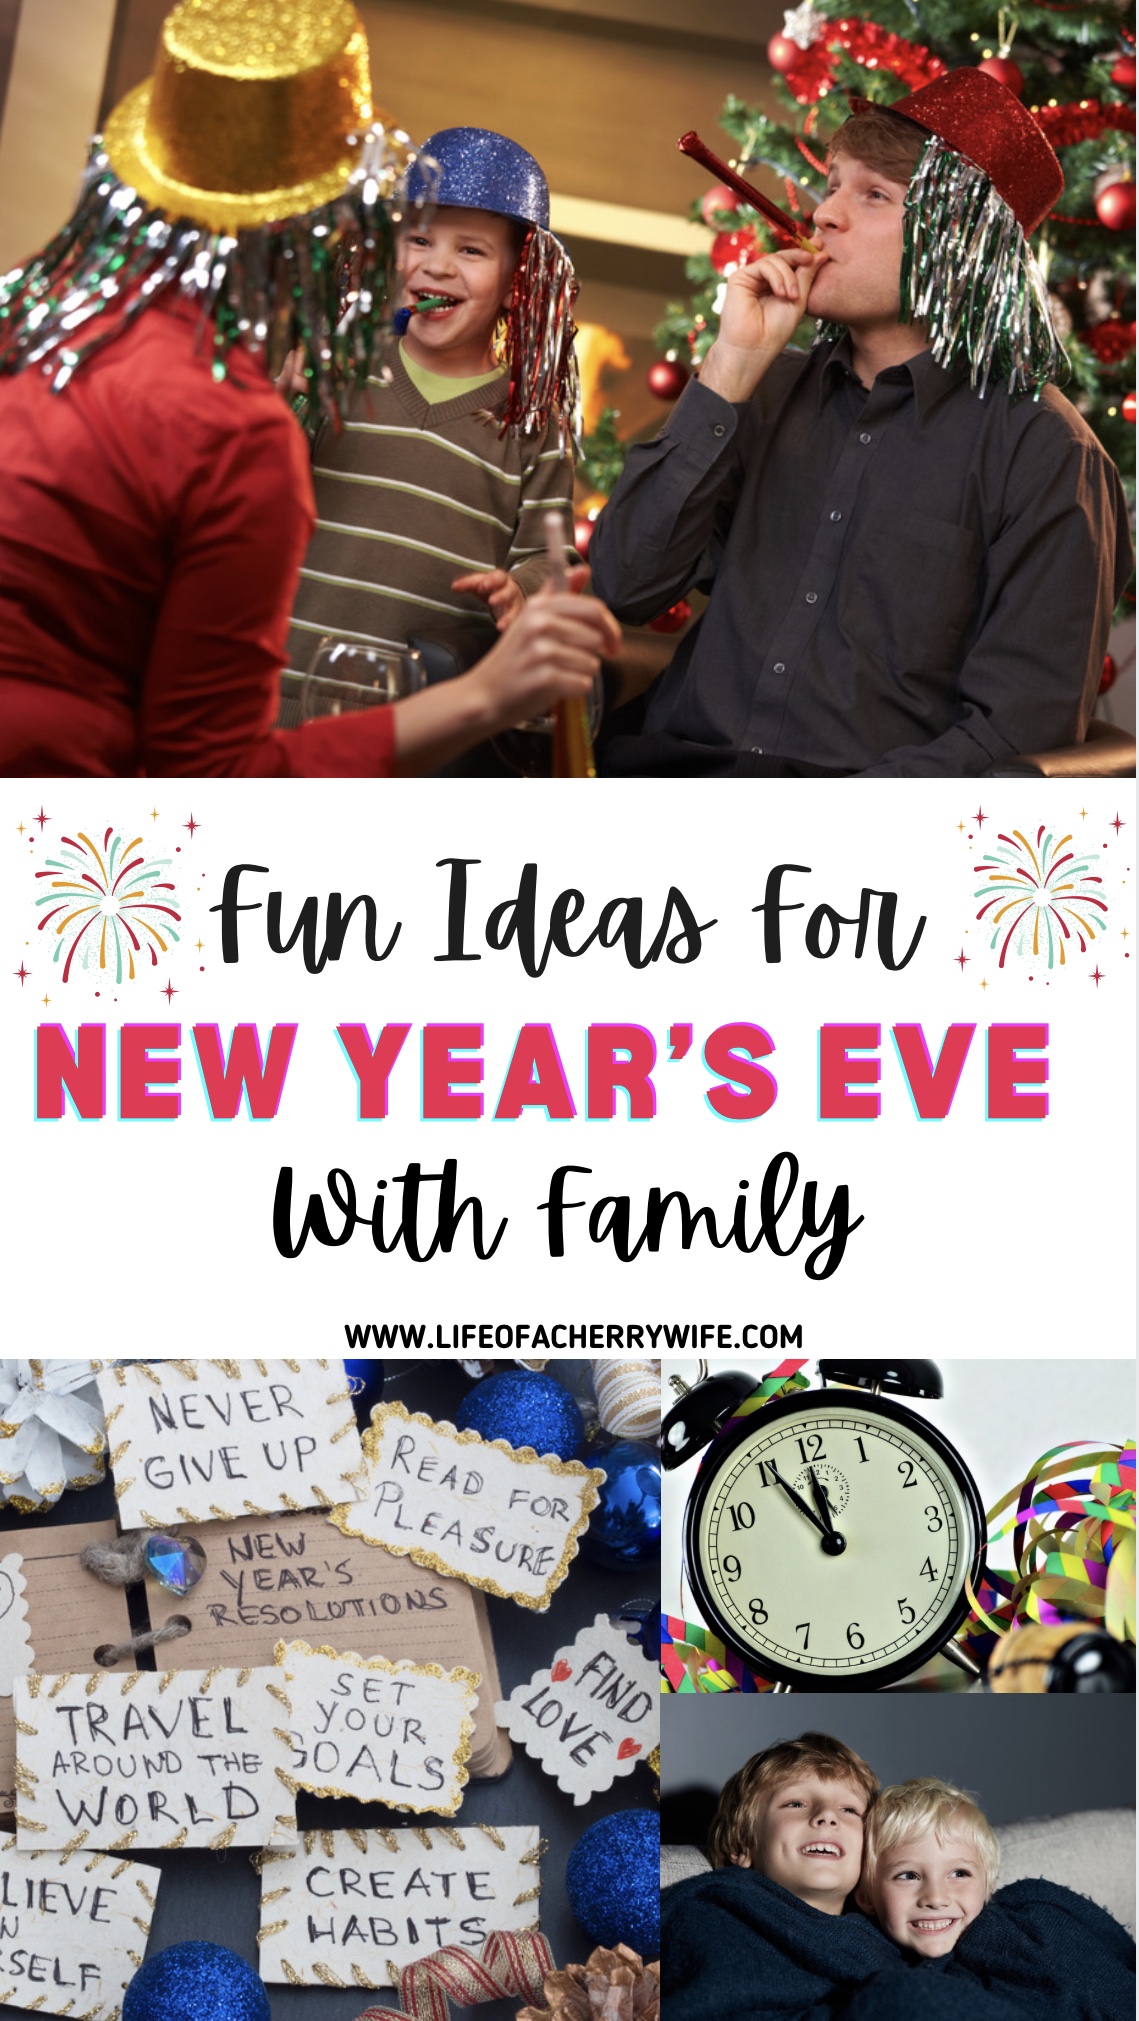 Fun New Year's Eve Ideas at Home Life of a Cherry Wife